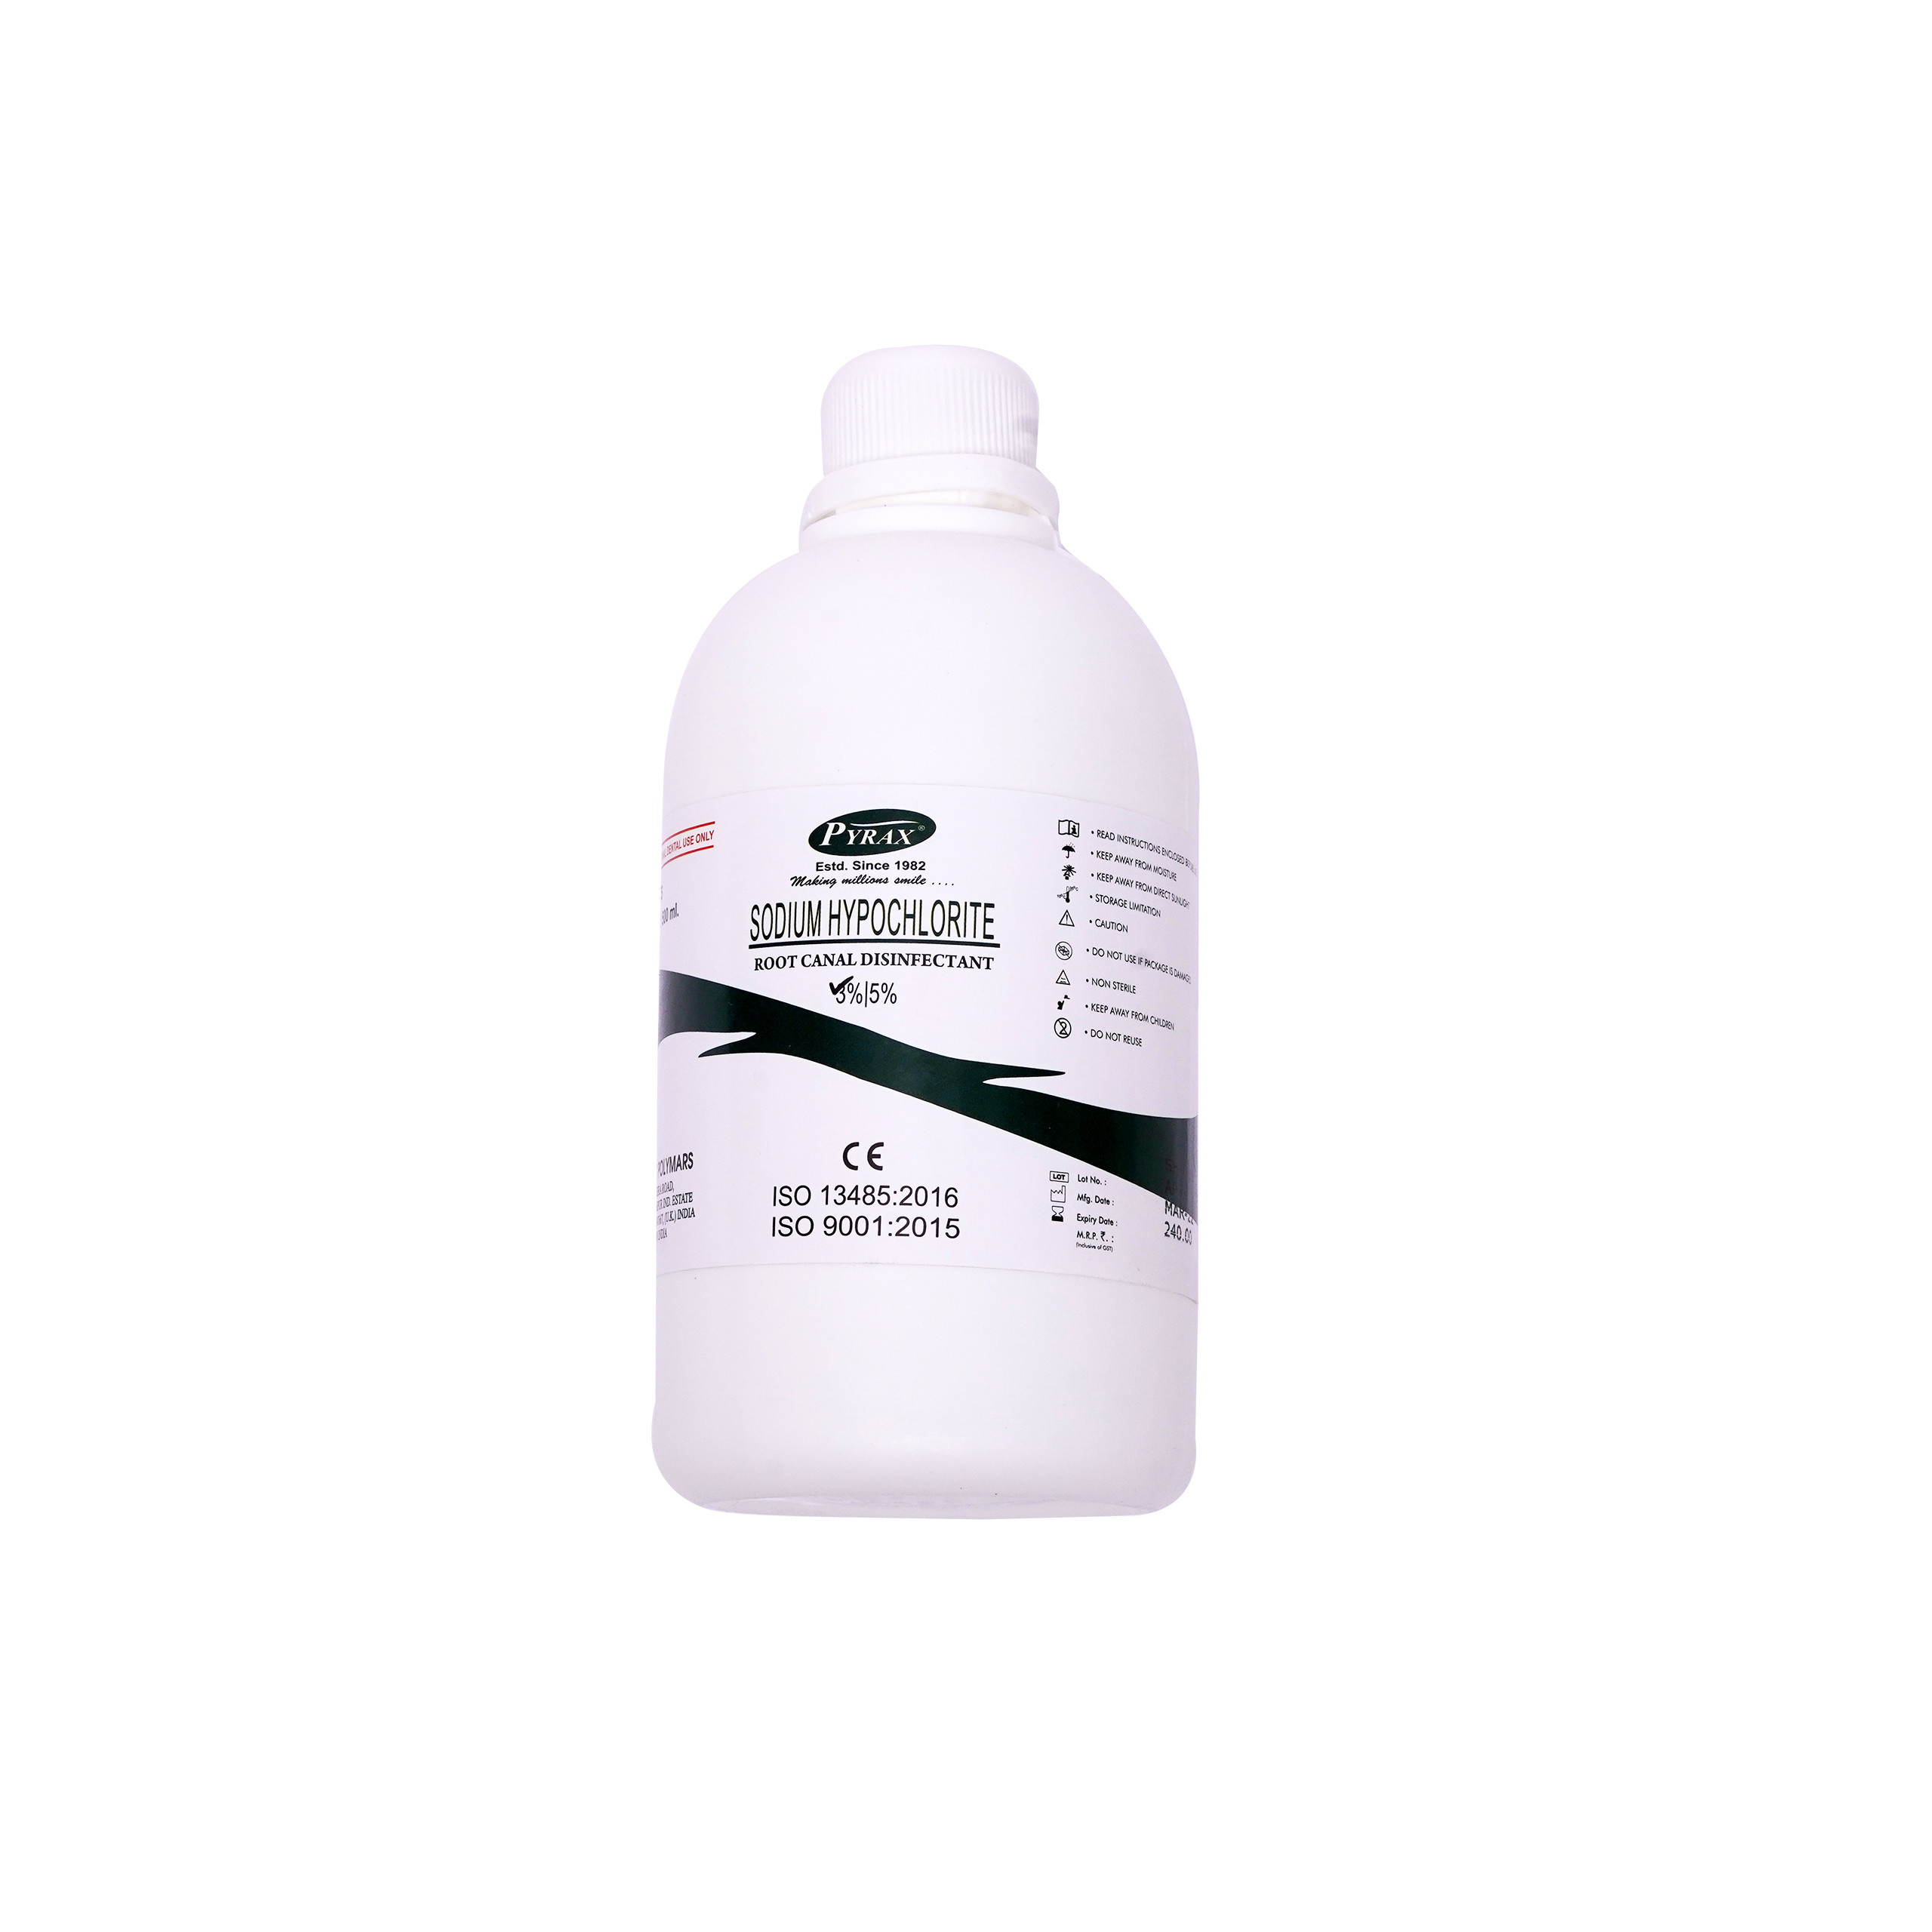 Coltene Sodium Hypochlorite Root Canal Disinfectant